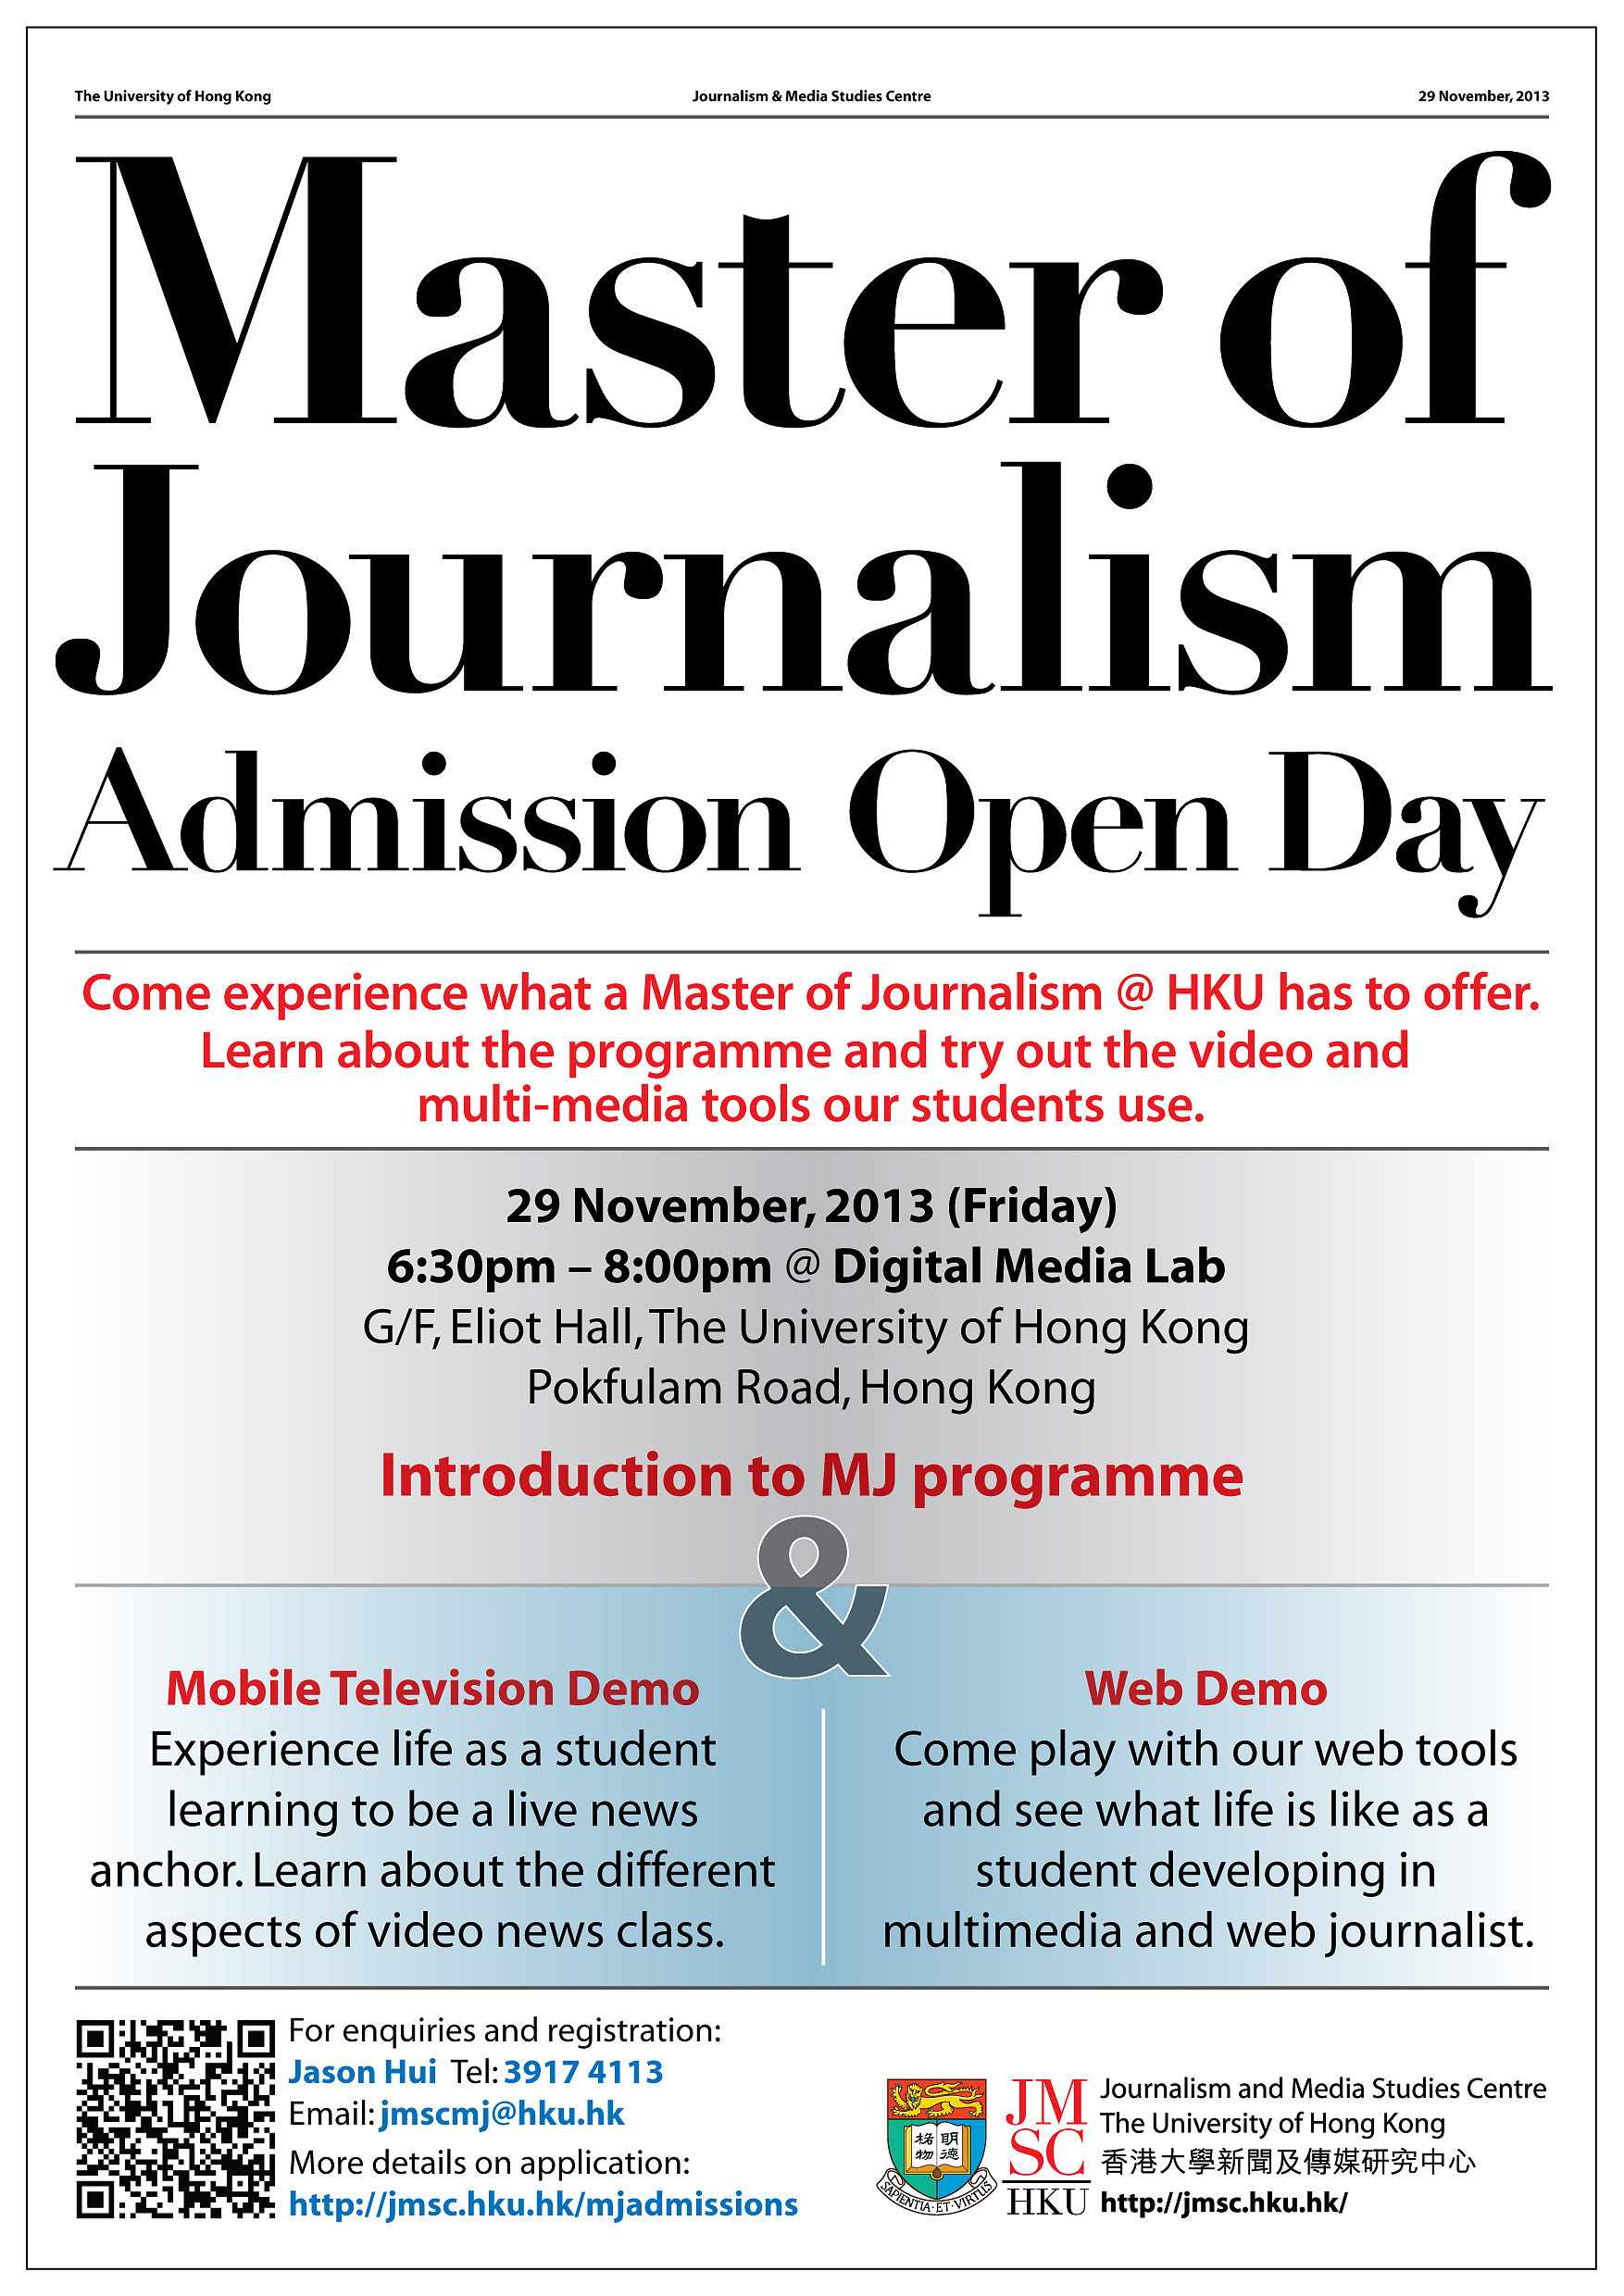 Come experience what a Master of Journalism @ HKU has to offer. For enquiries and registration please email Jason Hui at jmscmj@hku.hk or call 3917 4113. For more details, please visit http://jmsc.hku.hk/mjadmissions